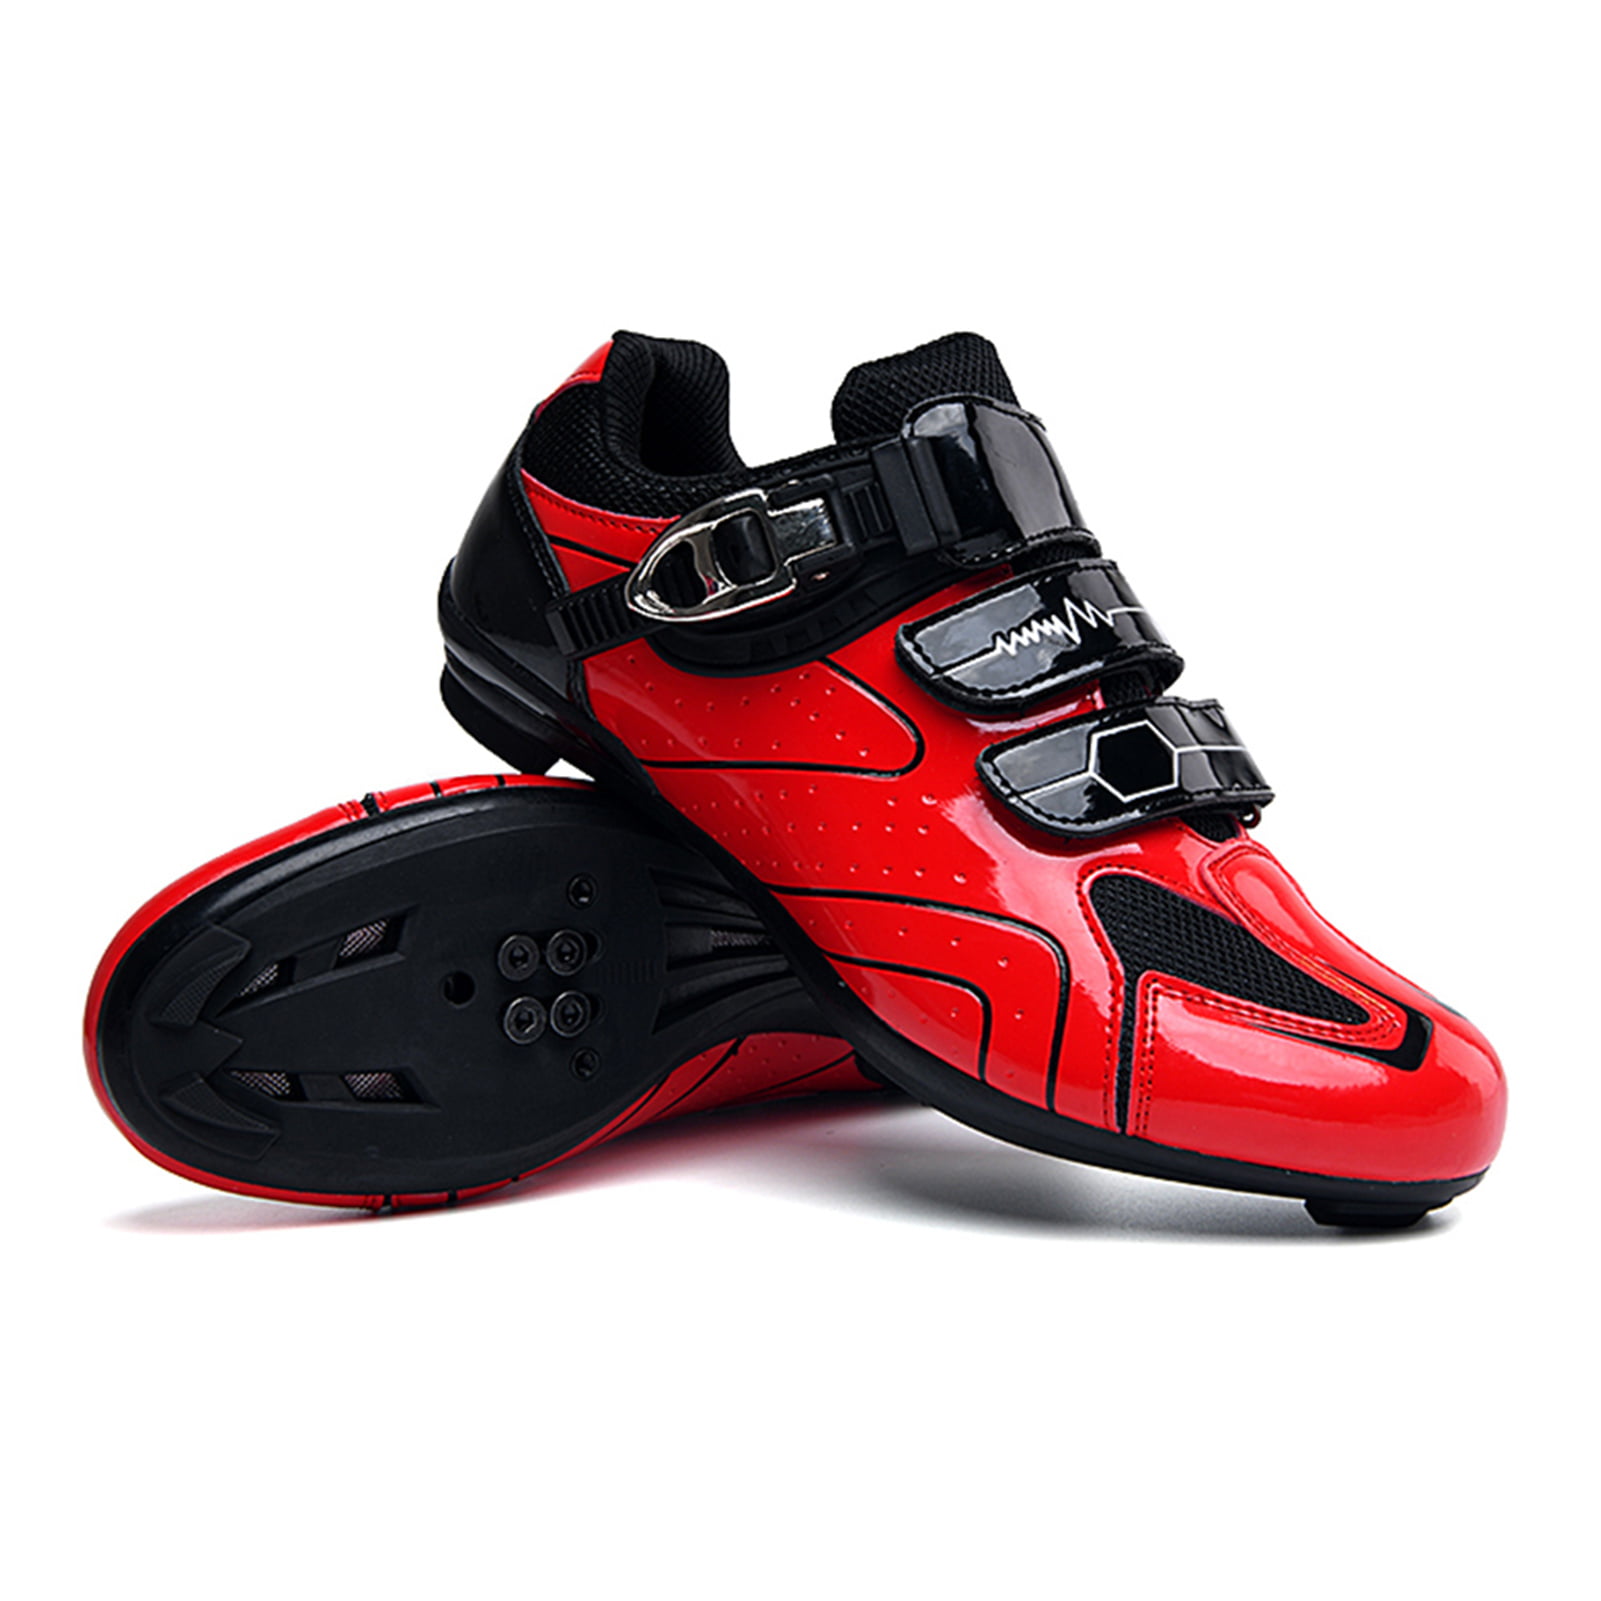 Details about   Men Road Bike Shoes MTB SPD Cycling Shoes Breathable Bicycle Sneakers Spin Shoes 